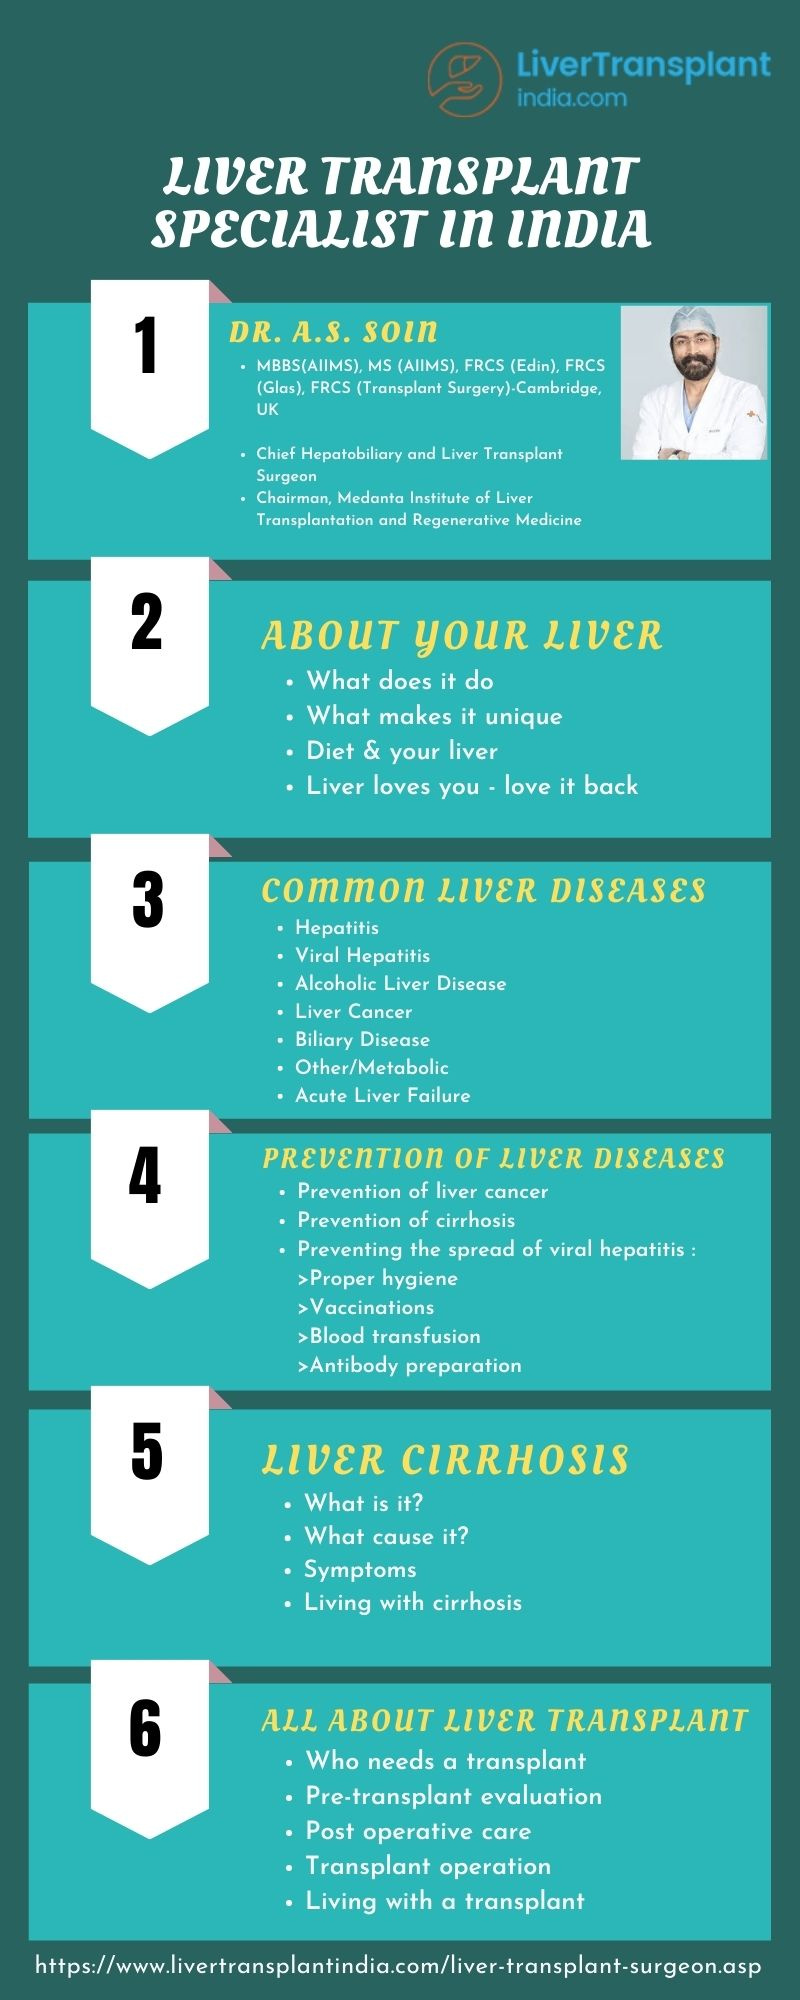 Top Liver Transplant Specialist In India By Liver Transplant India On